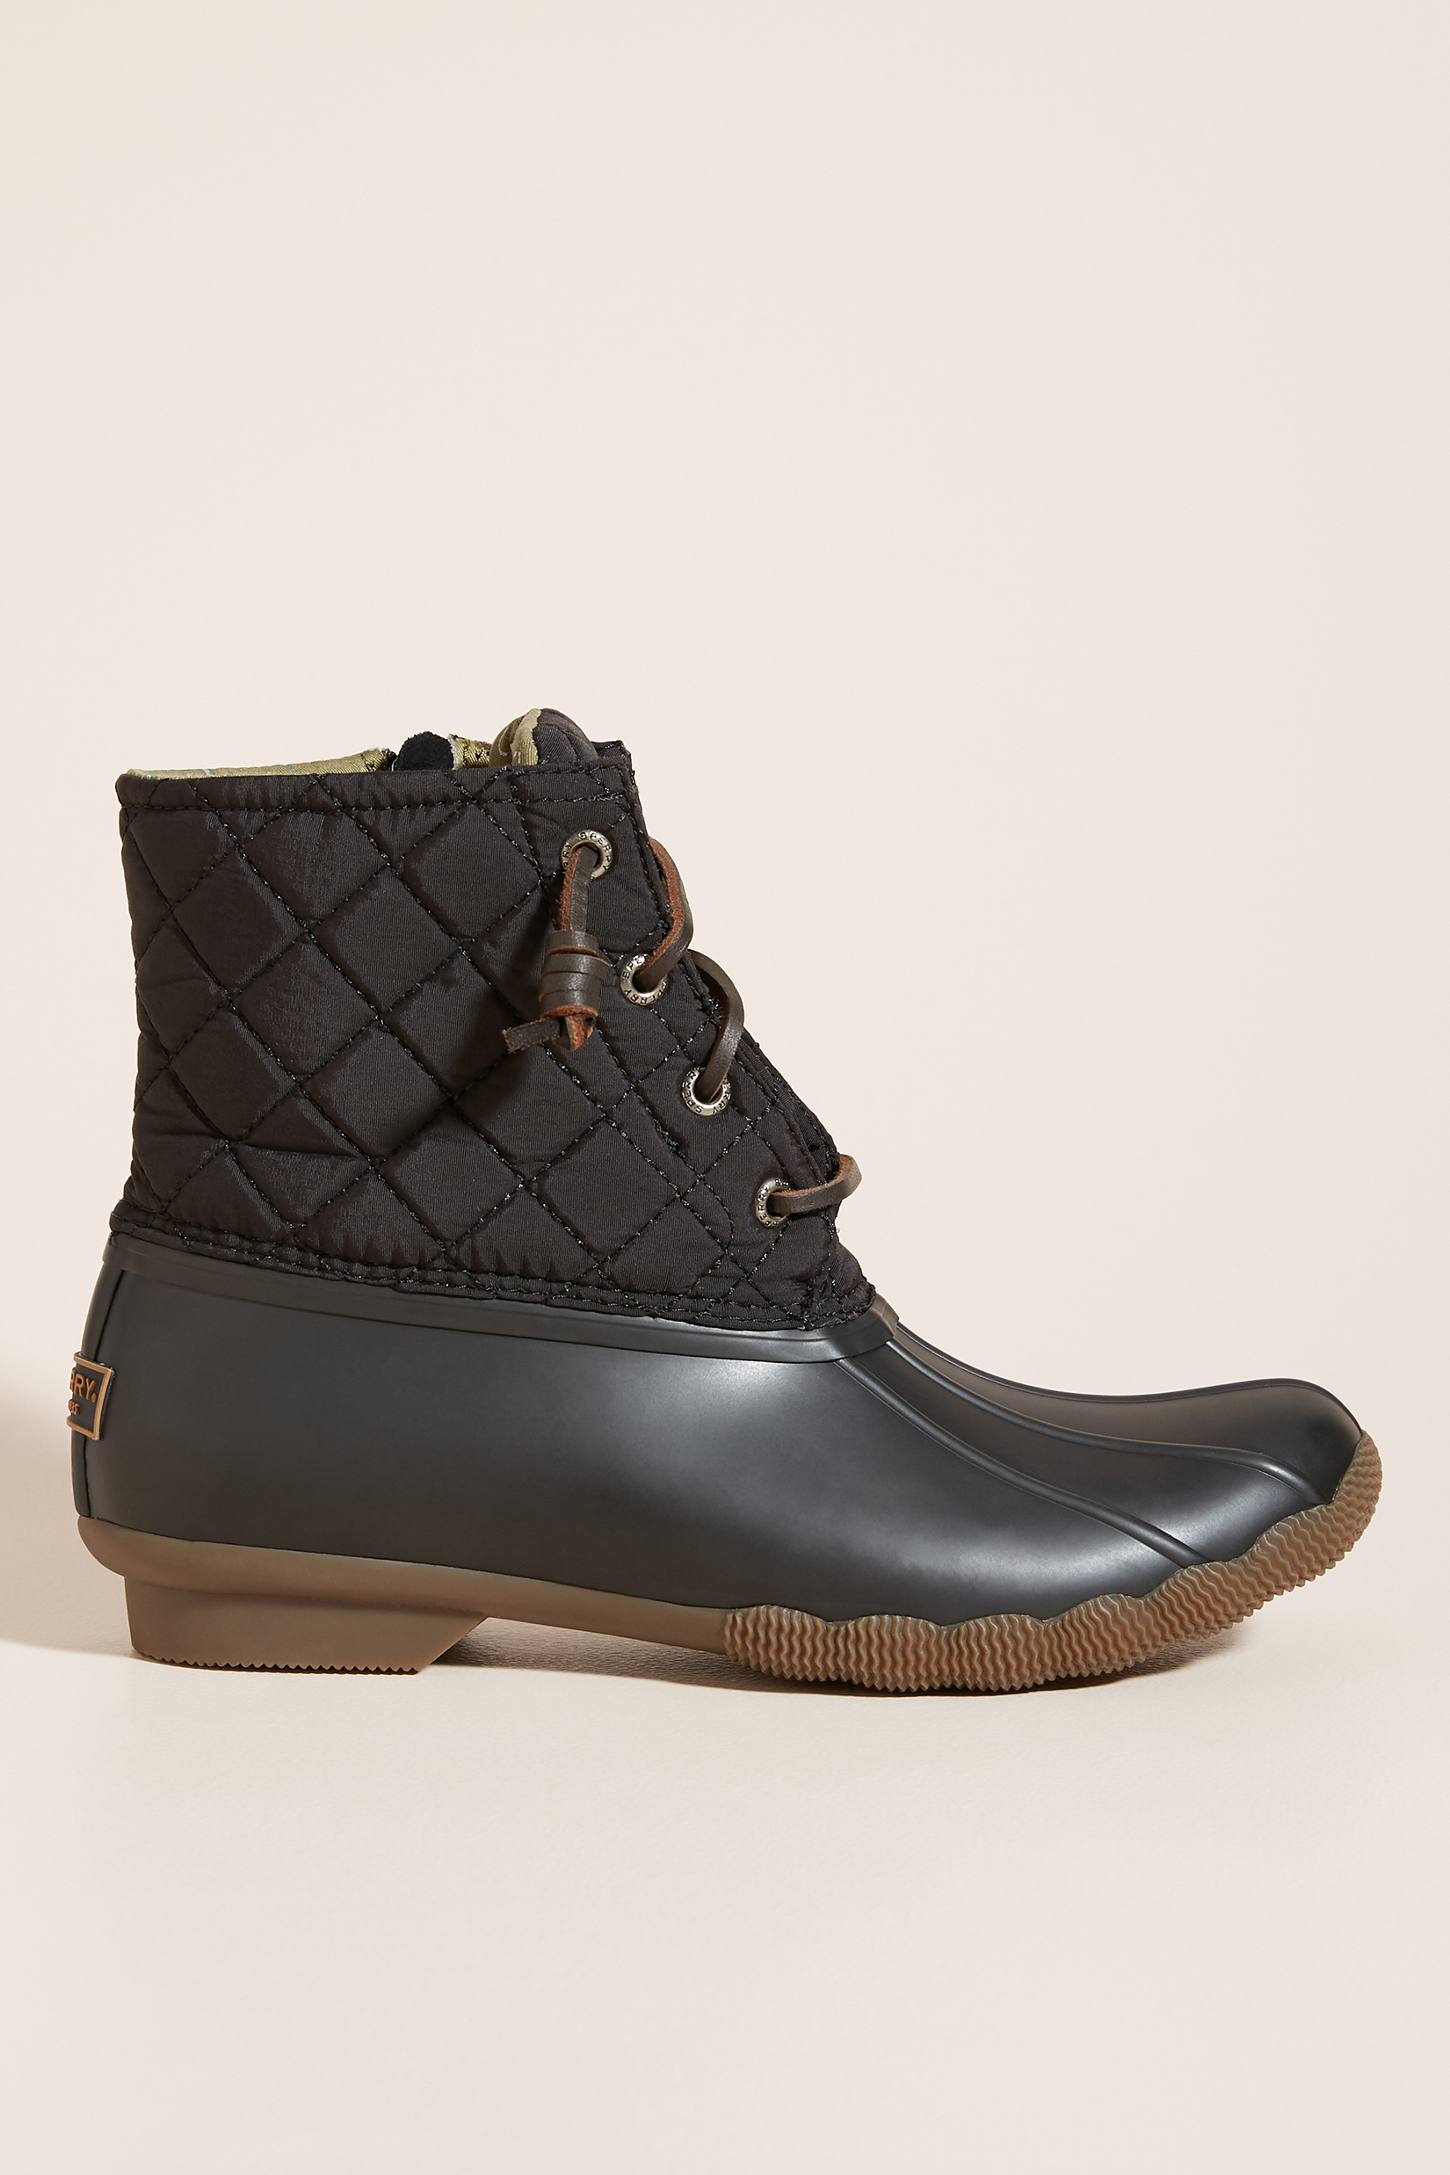 Sperry Quilted Rainboot